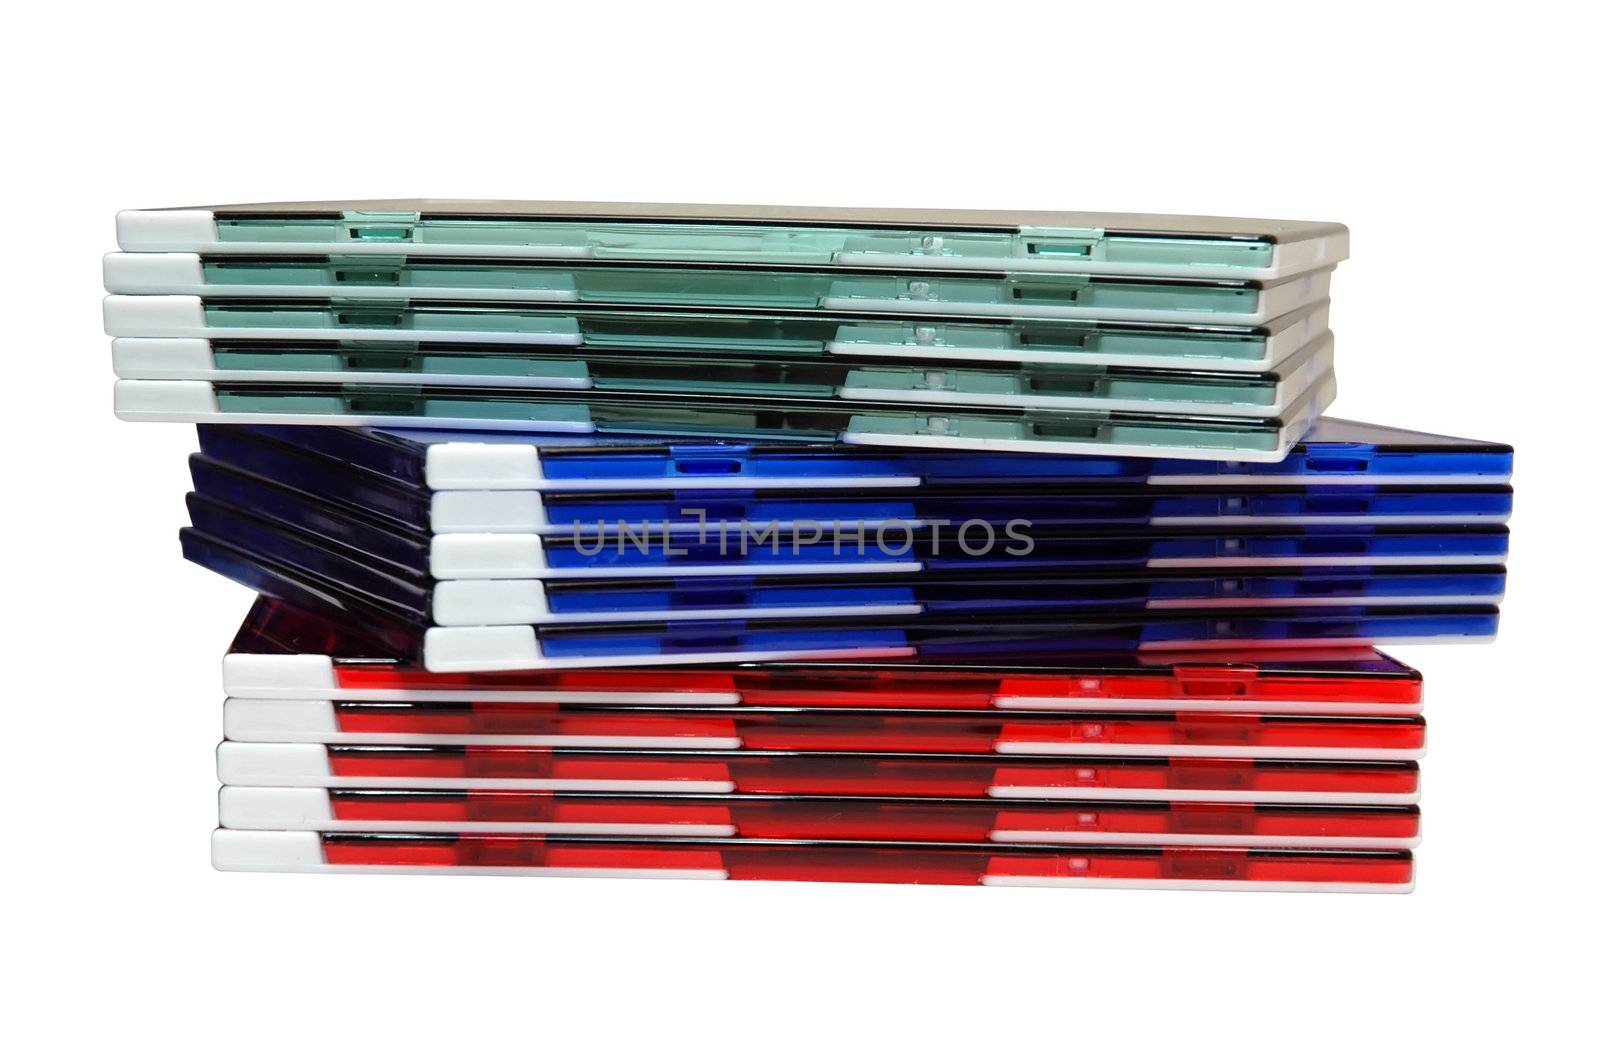 Stack of colorful cd cases.